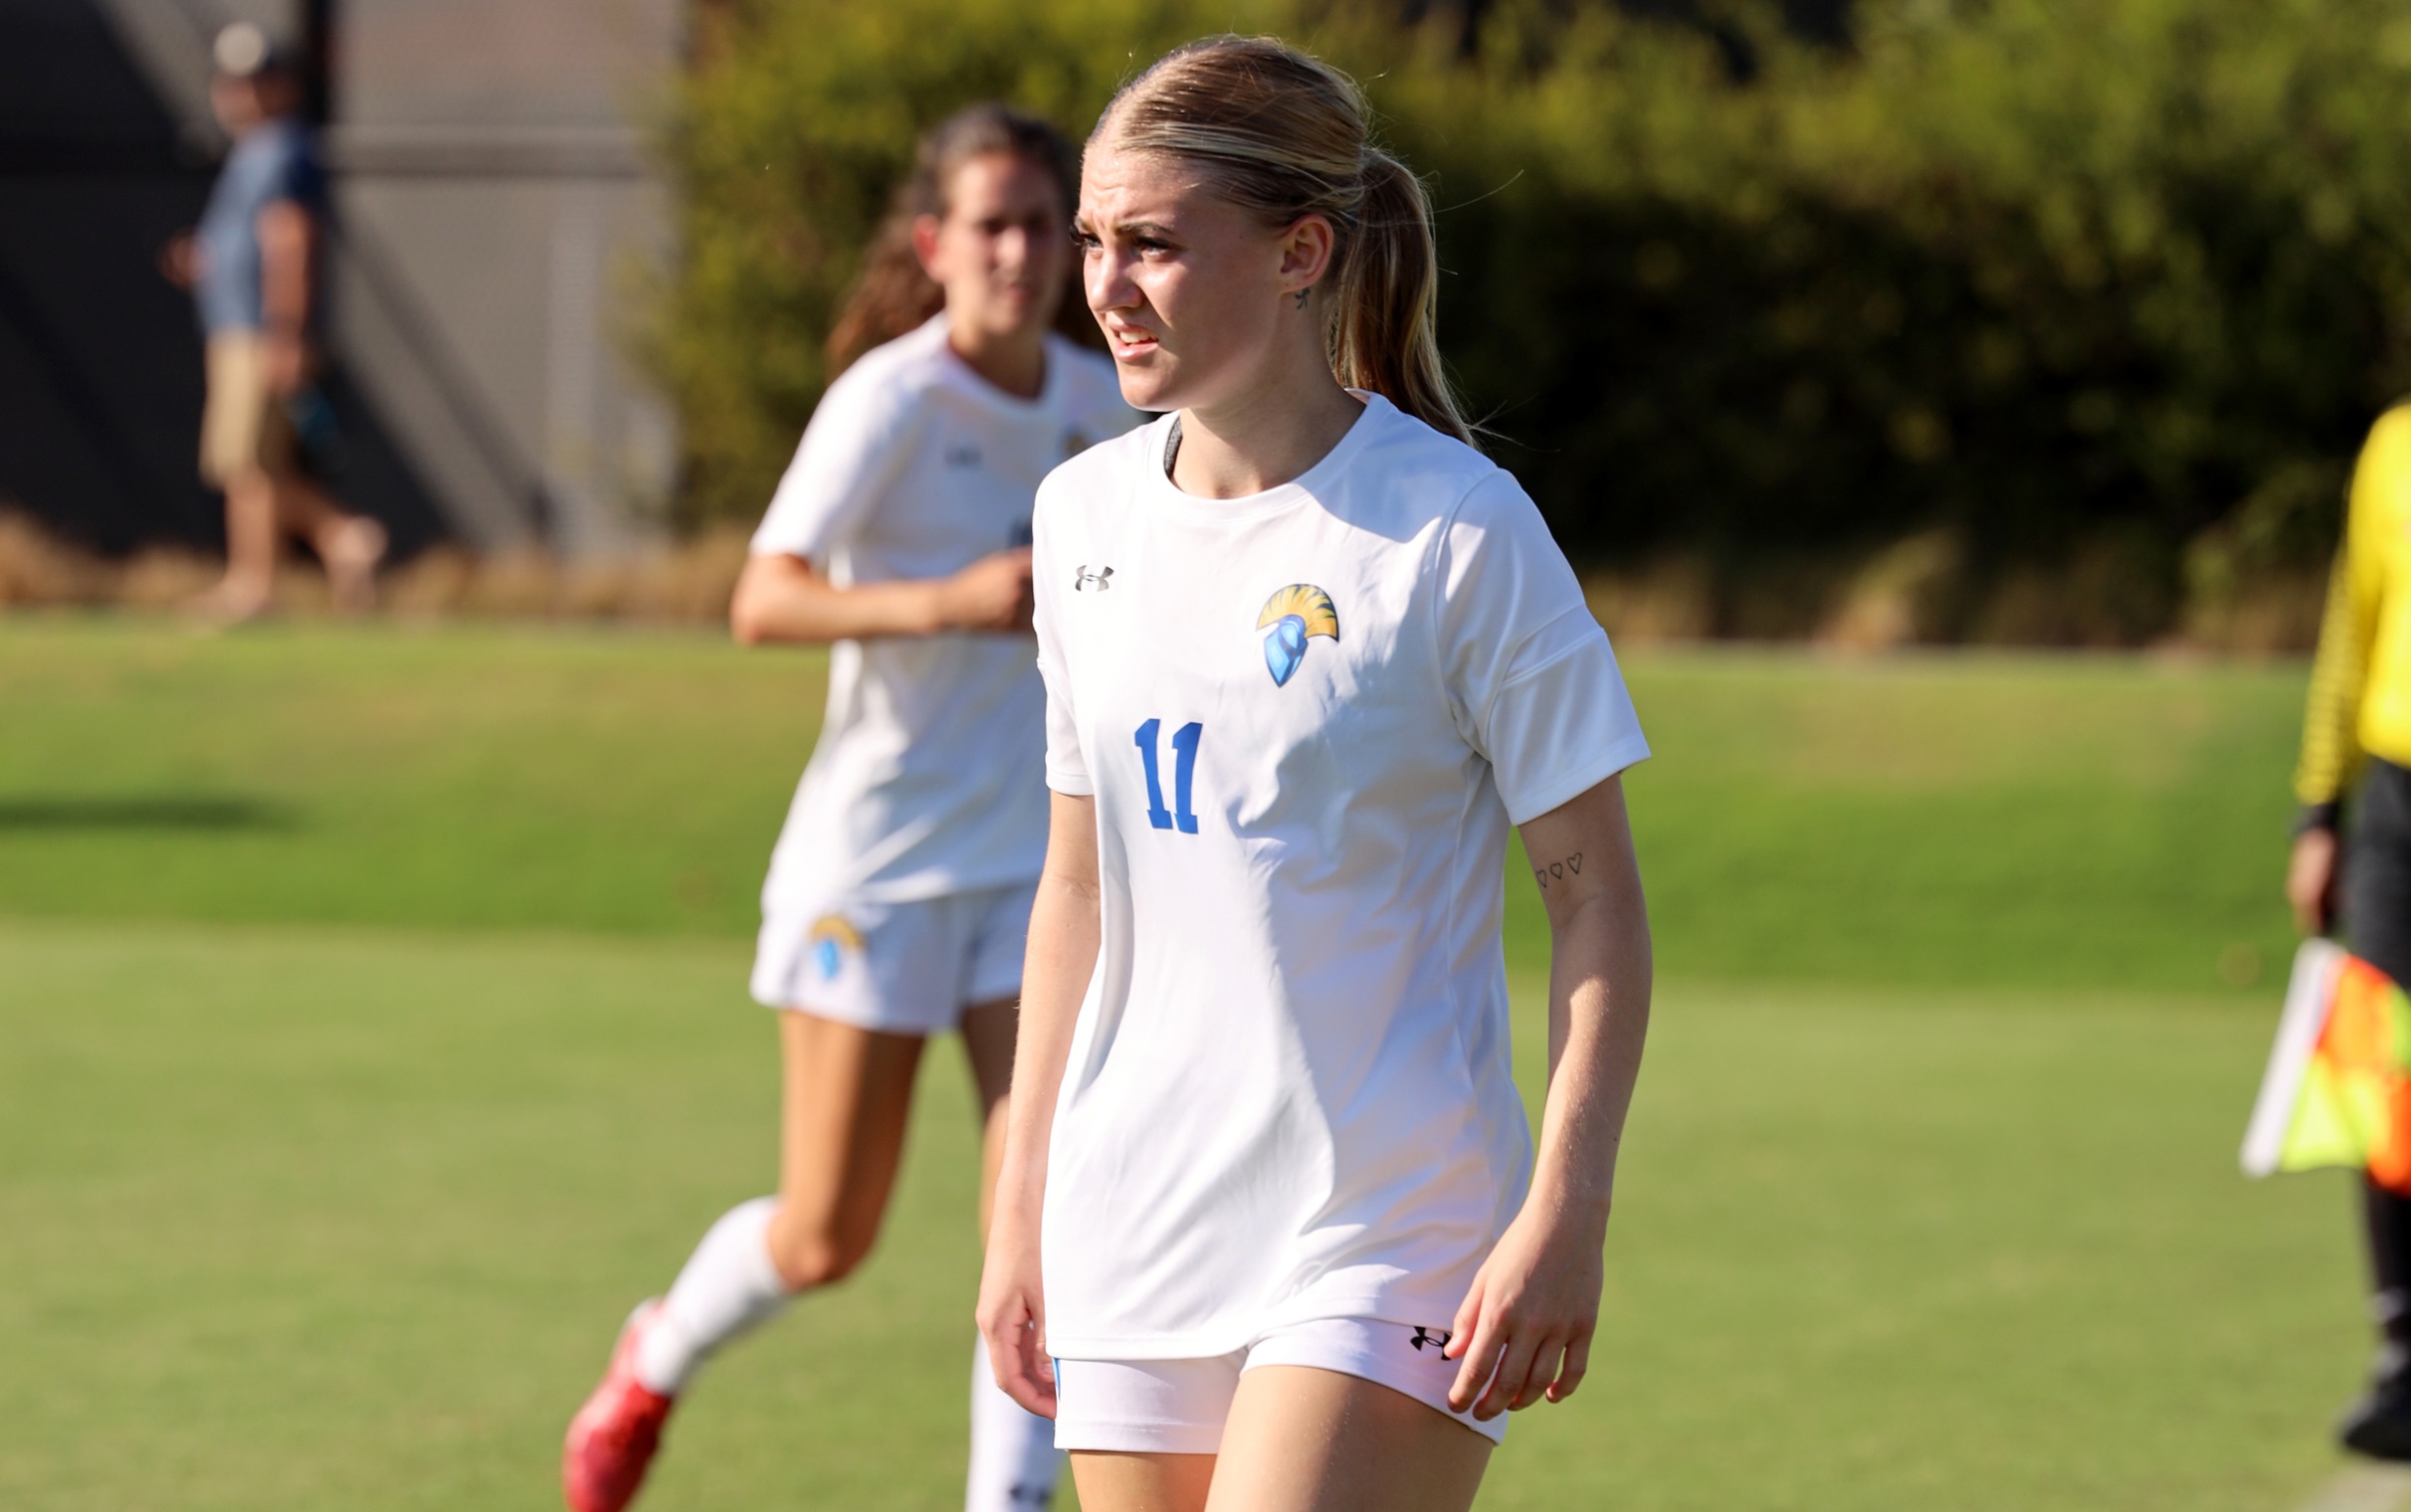 Daisy Clements scored a hat trick for the Warriors Saturday in Vallejo. File Photo.